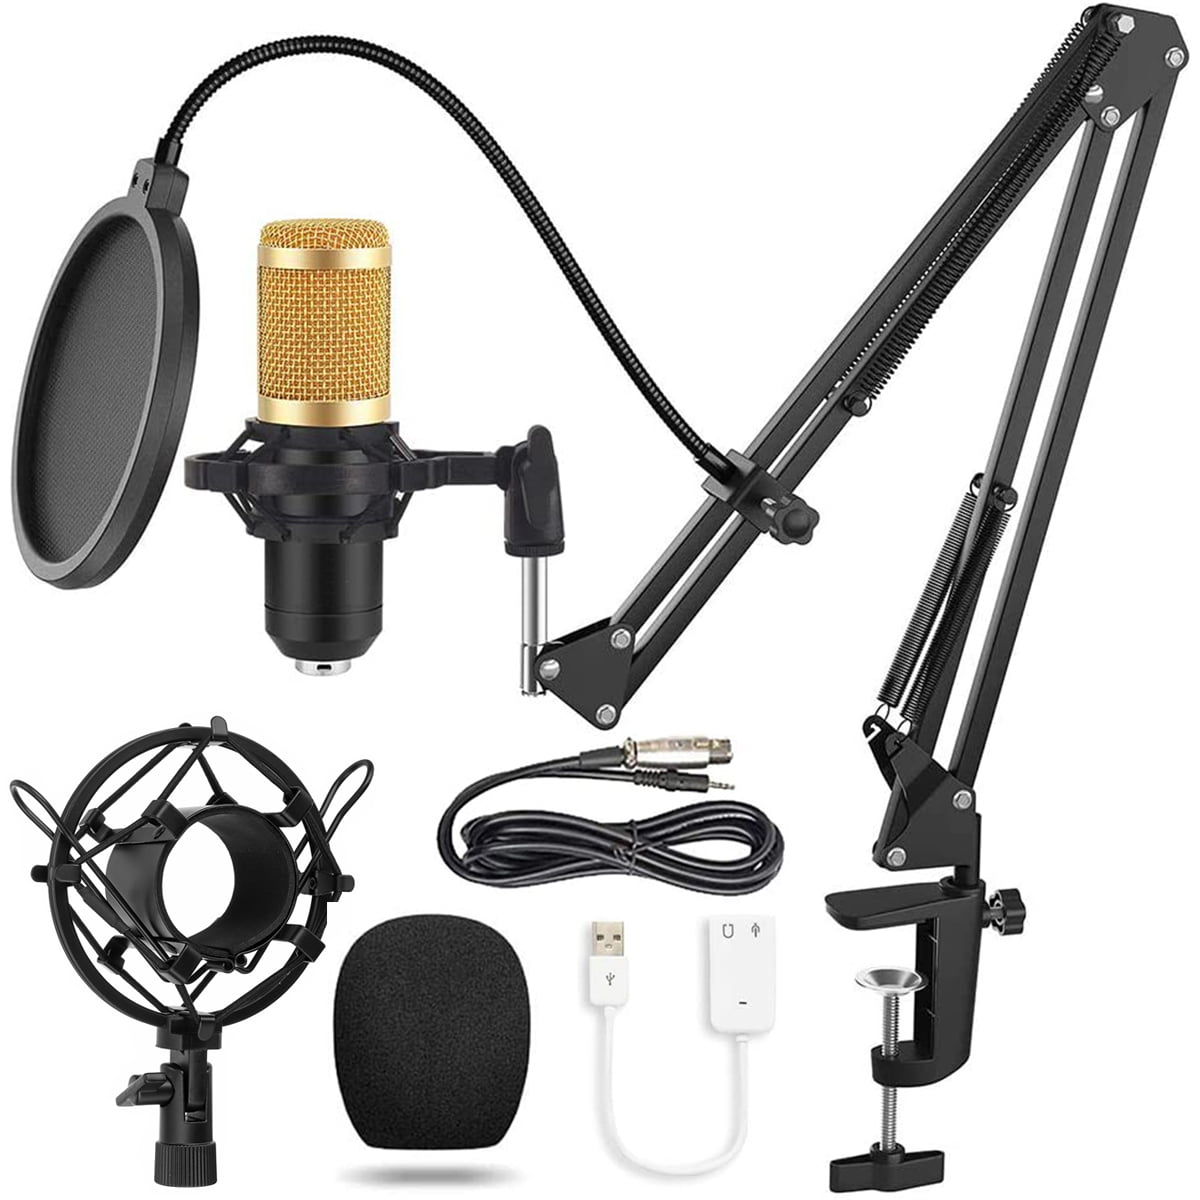 Computer Microphone,Aokeo Storm Professional USB Studio Condenser Games Microphone for Chatting/Skype/YouTube/Recording/Gaming/Podcasting for iMac PC Laptop MacBook Playstation